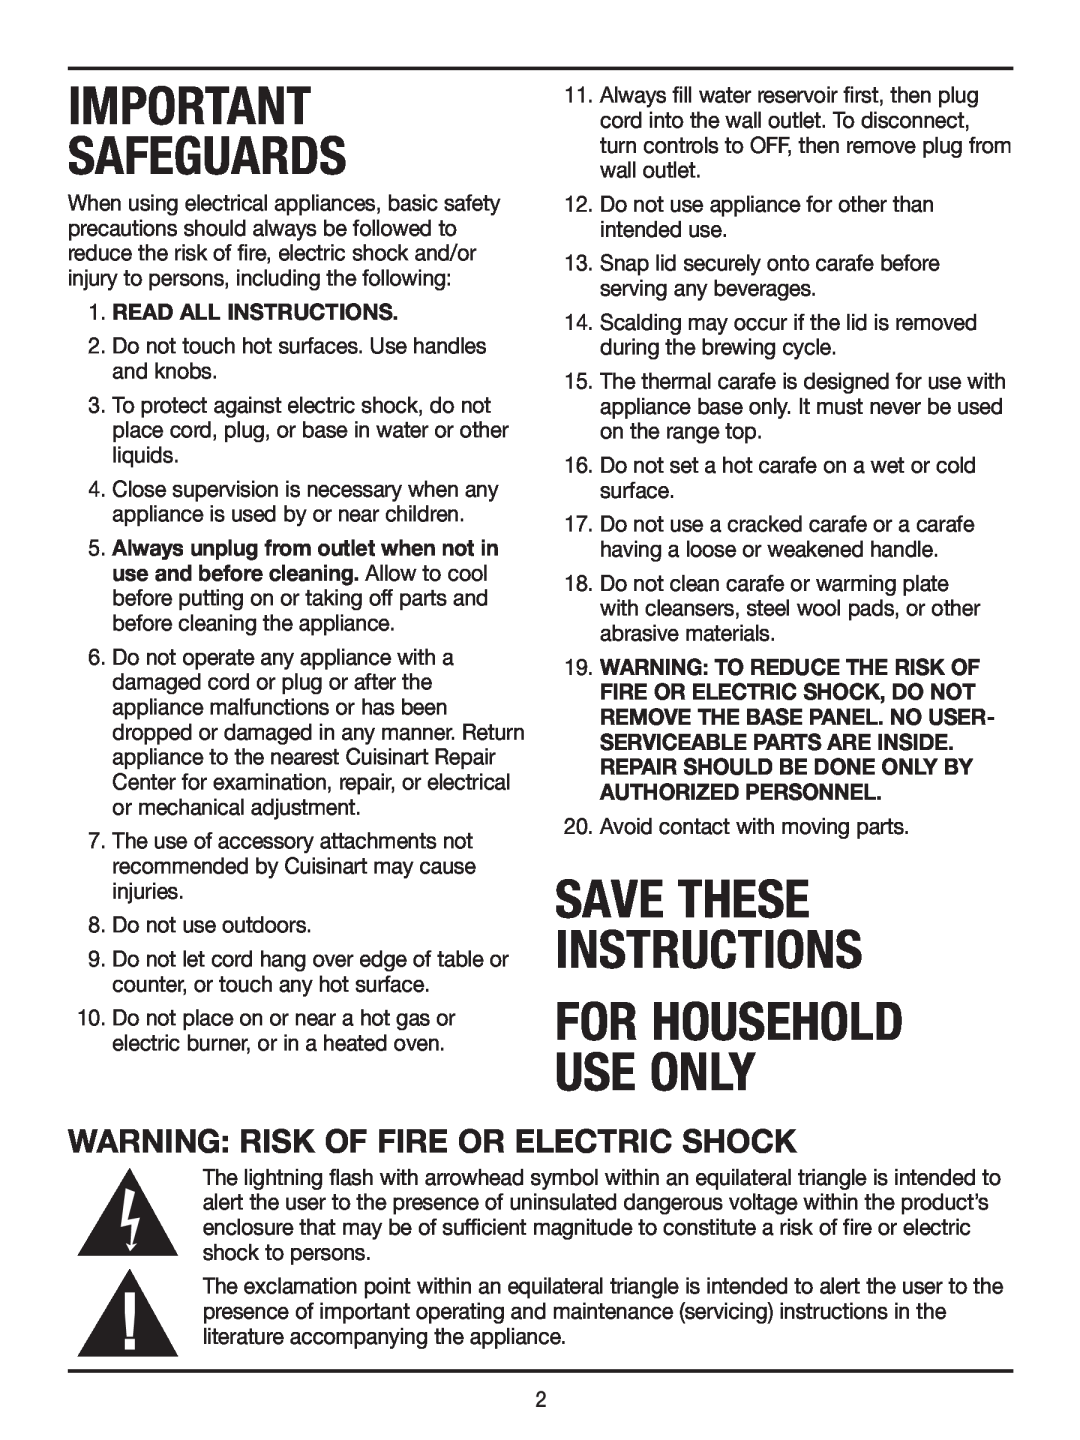 Cuisinart DTC-975BKN Safeguards, Save These Instructions, For Household Use Only, WARNING RISK Of FIRE OR ELECTRIC SHOCK 